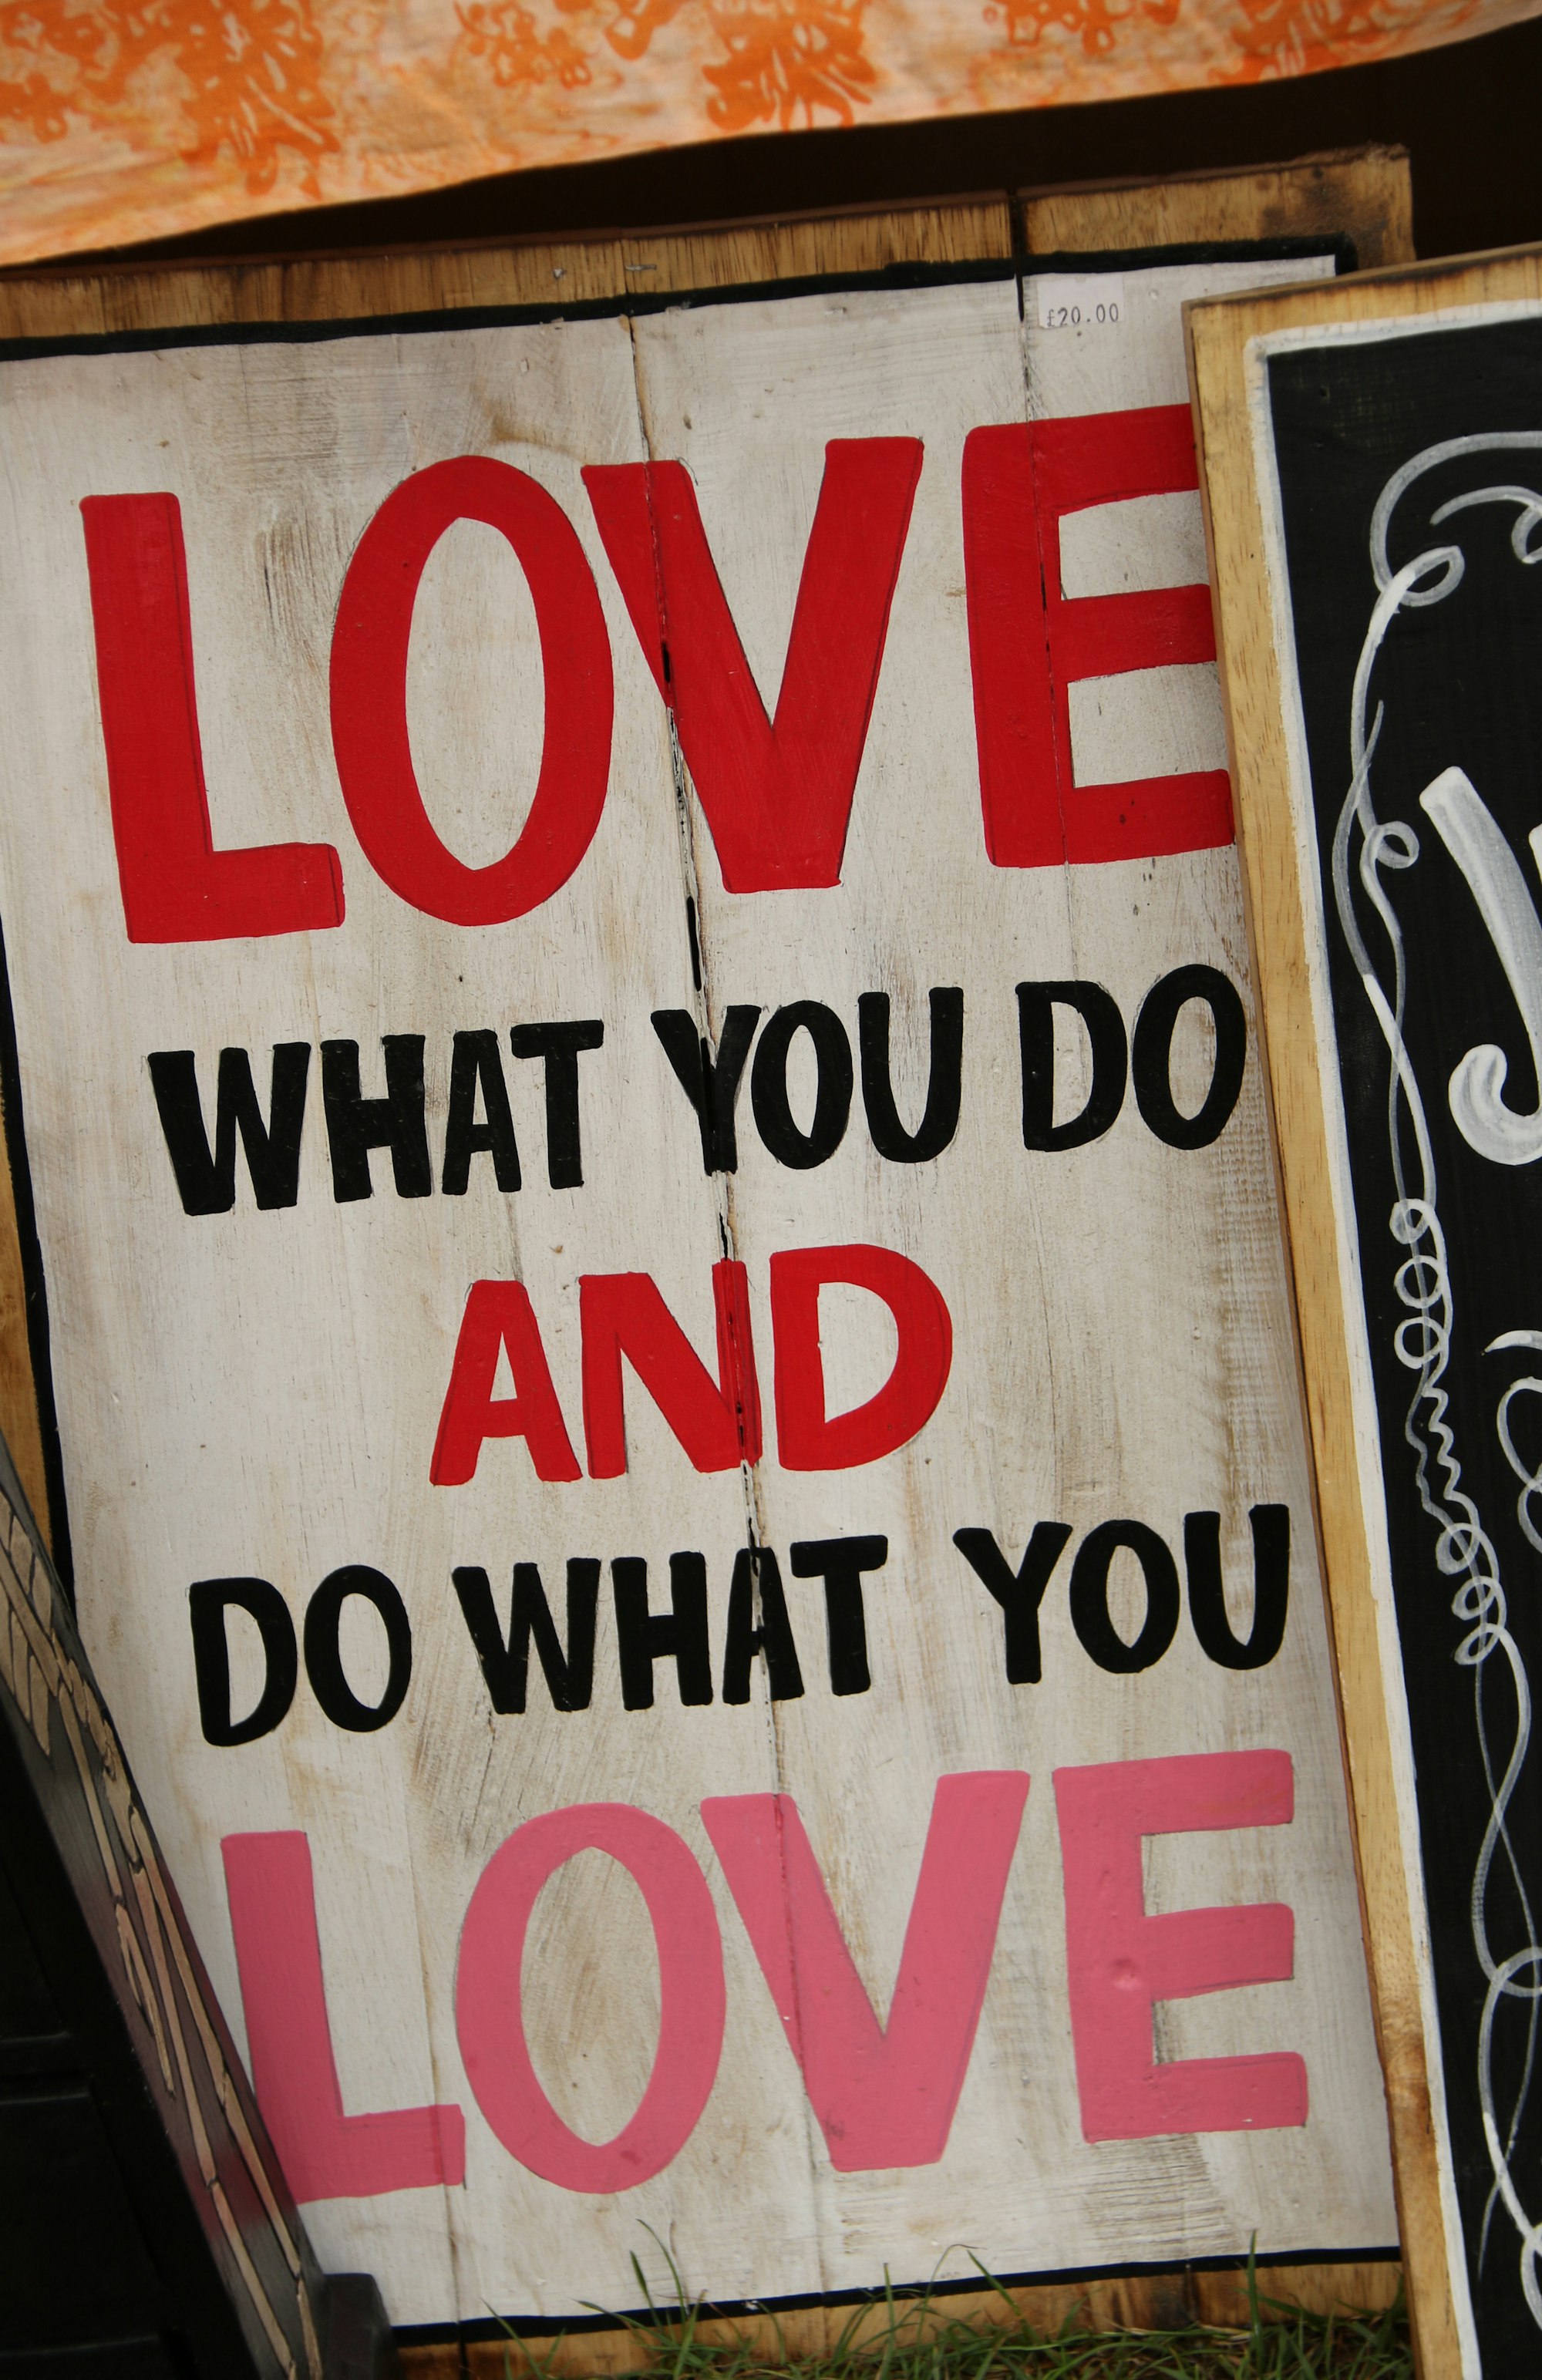 A sign stating "Love what you do and do what you love" (Photo by Nick Fewings / Unsplash)